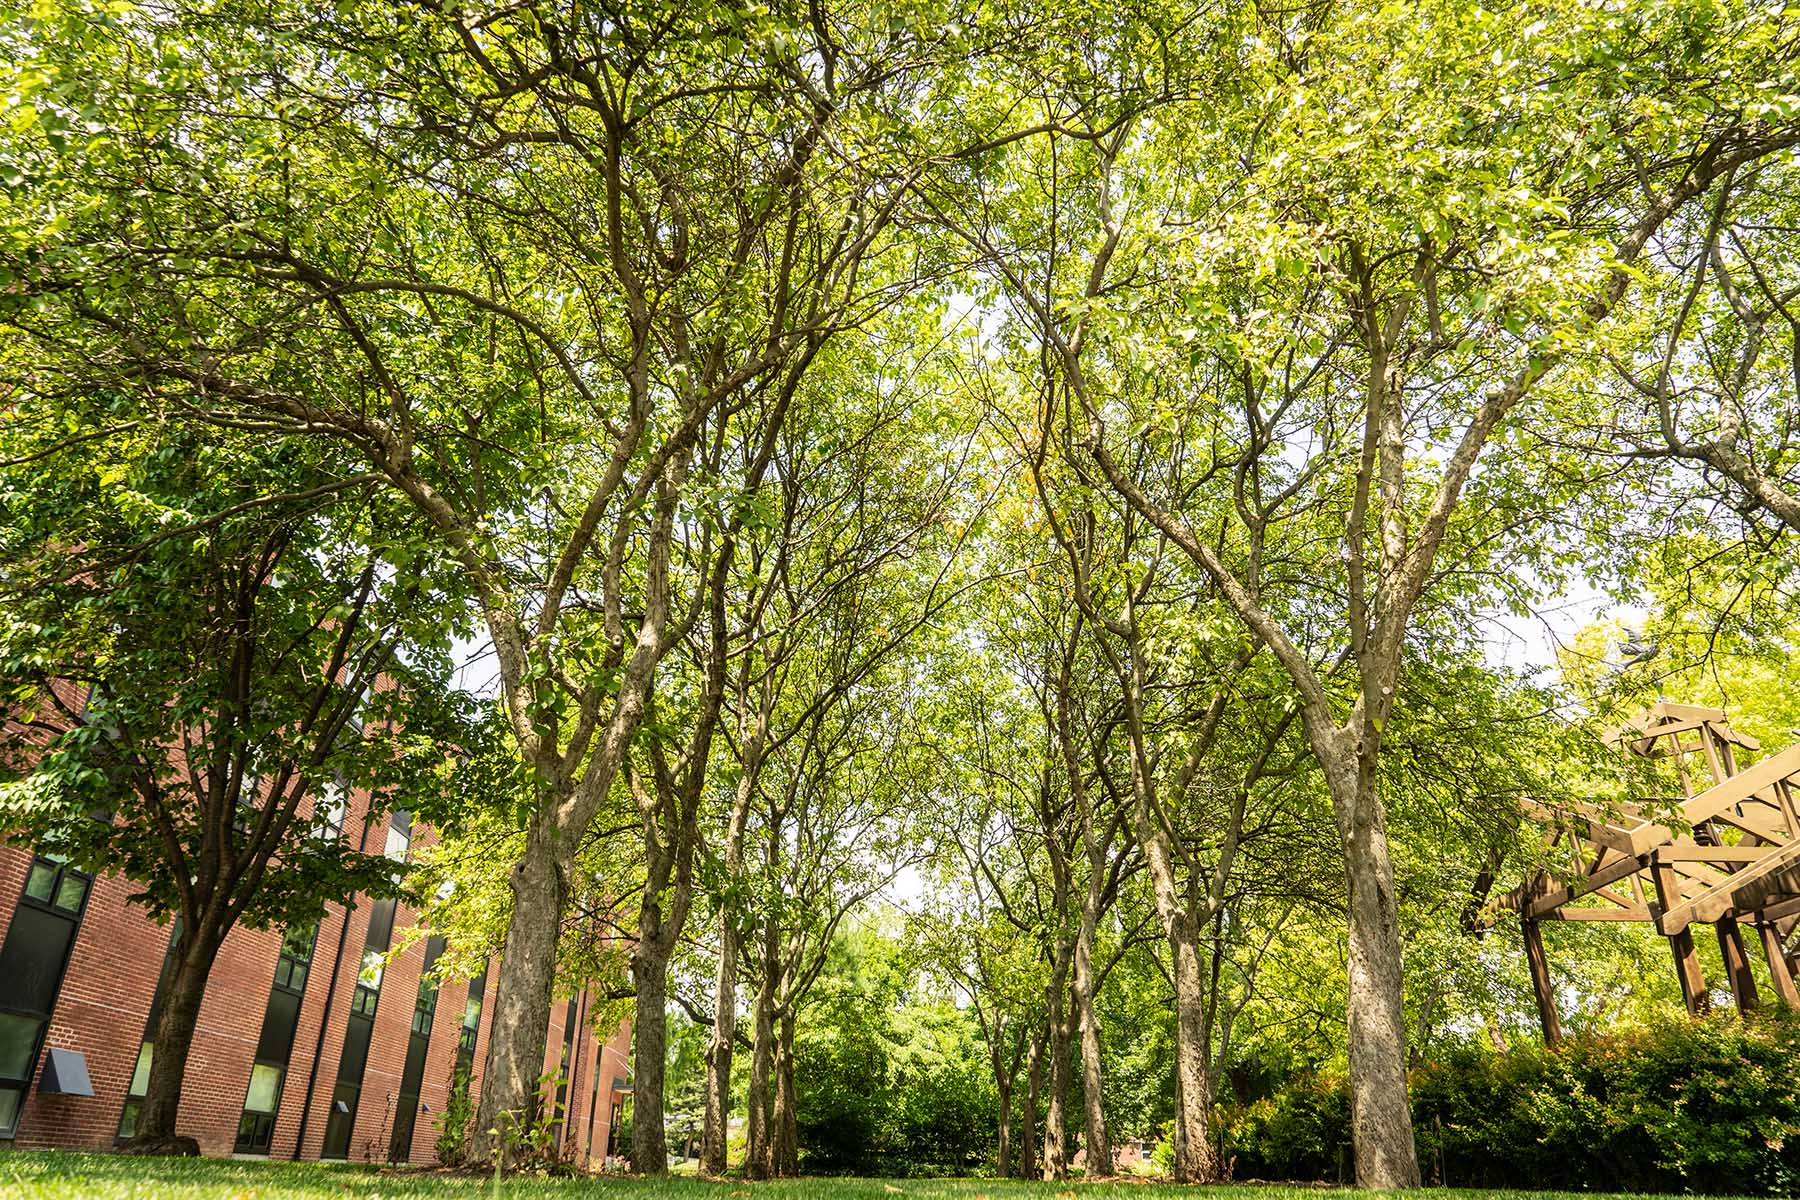 Landscape of beautiful trees on campus.